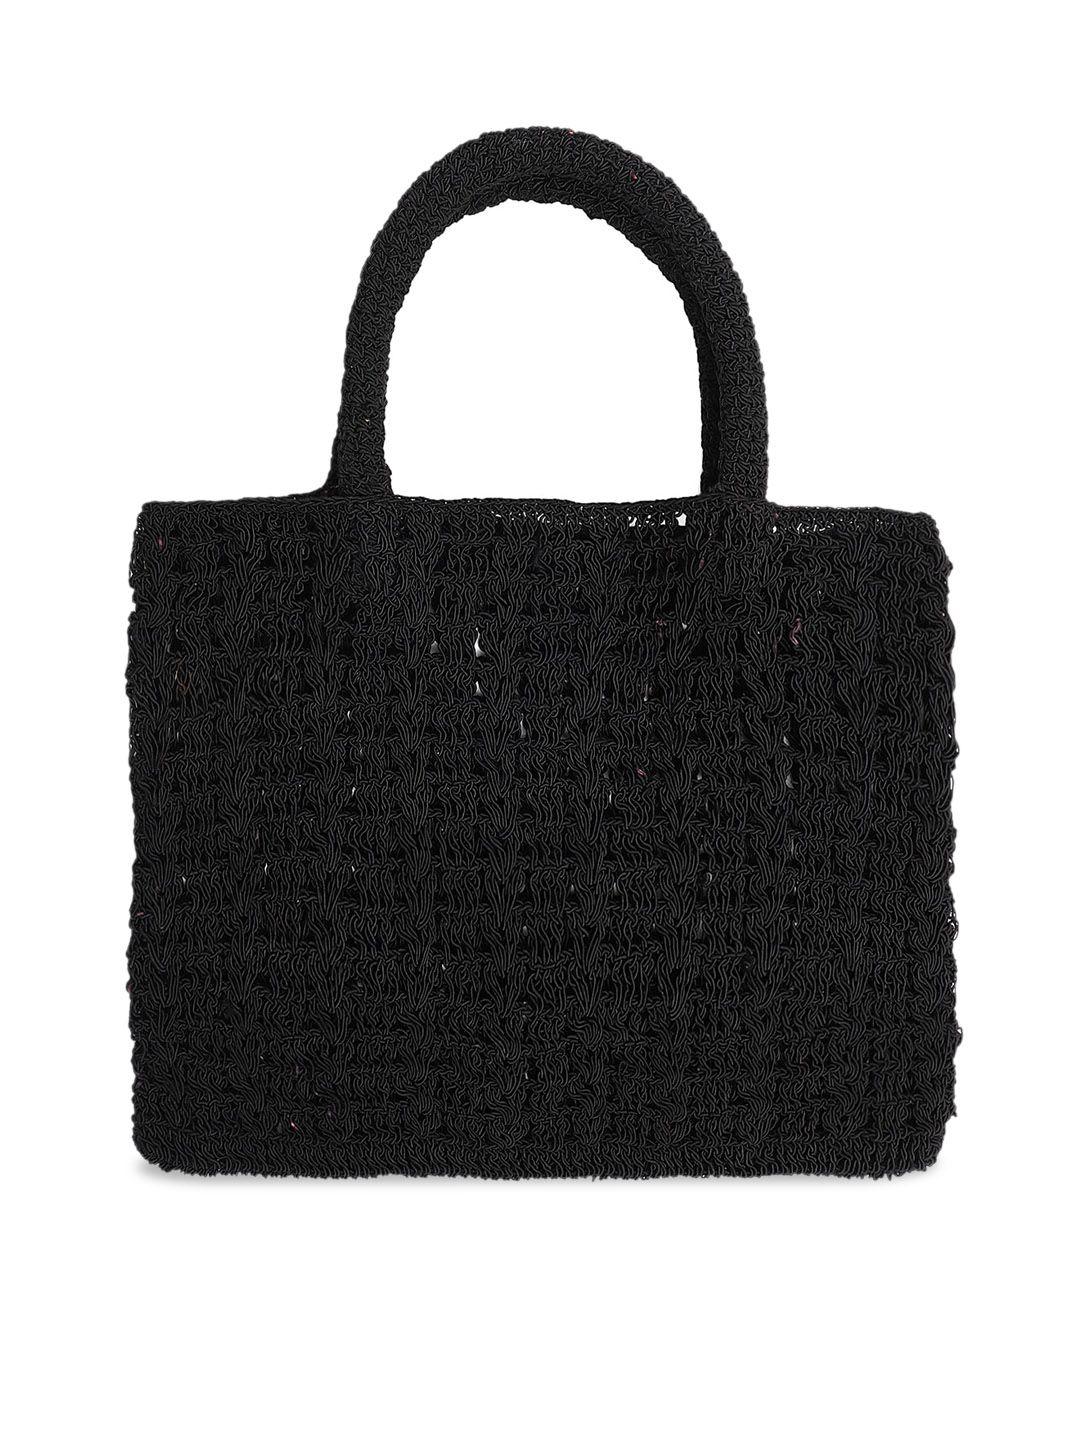 rediscover fashion textured oversized shopper tote bag